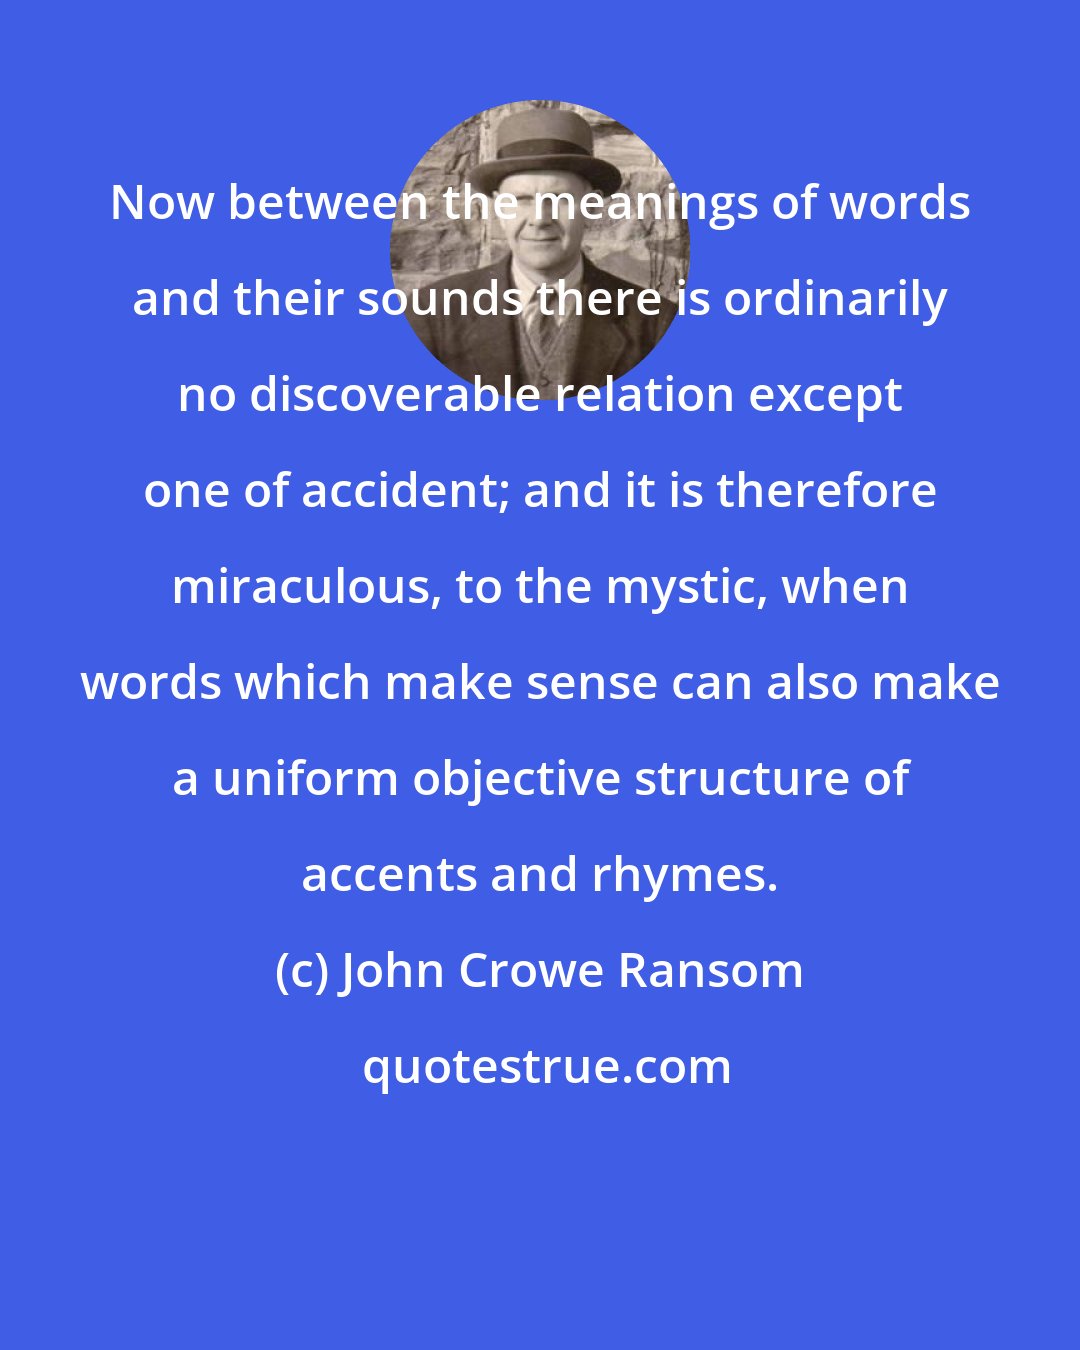 John Crowe Ransom: Now between the meanings of words and their sounds there is ordinarily no discoverable relation except one of accident; and it is therefore miraculous, to the mystic, when words which make sense can also make a uniform objective structure of accents and rhymes.